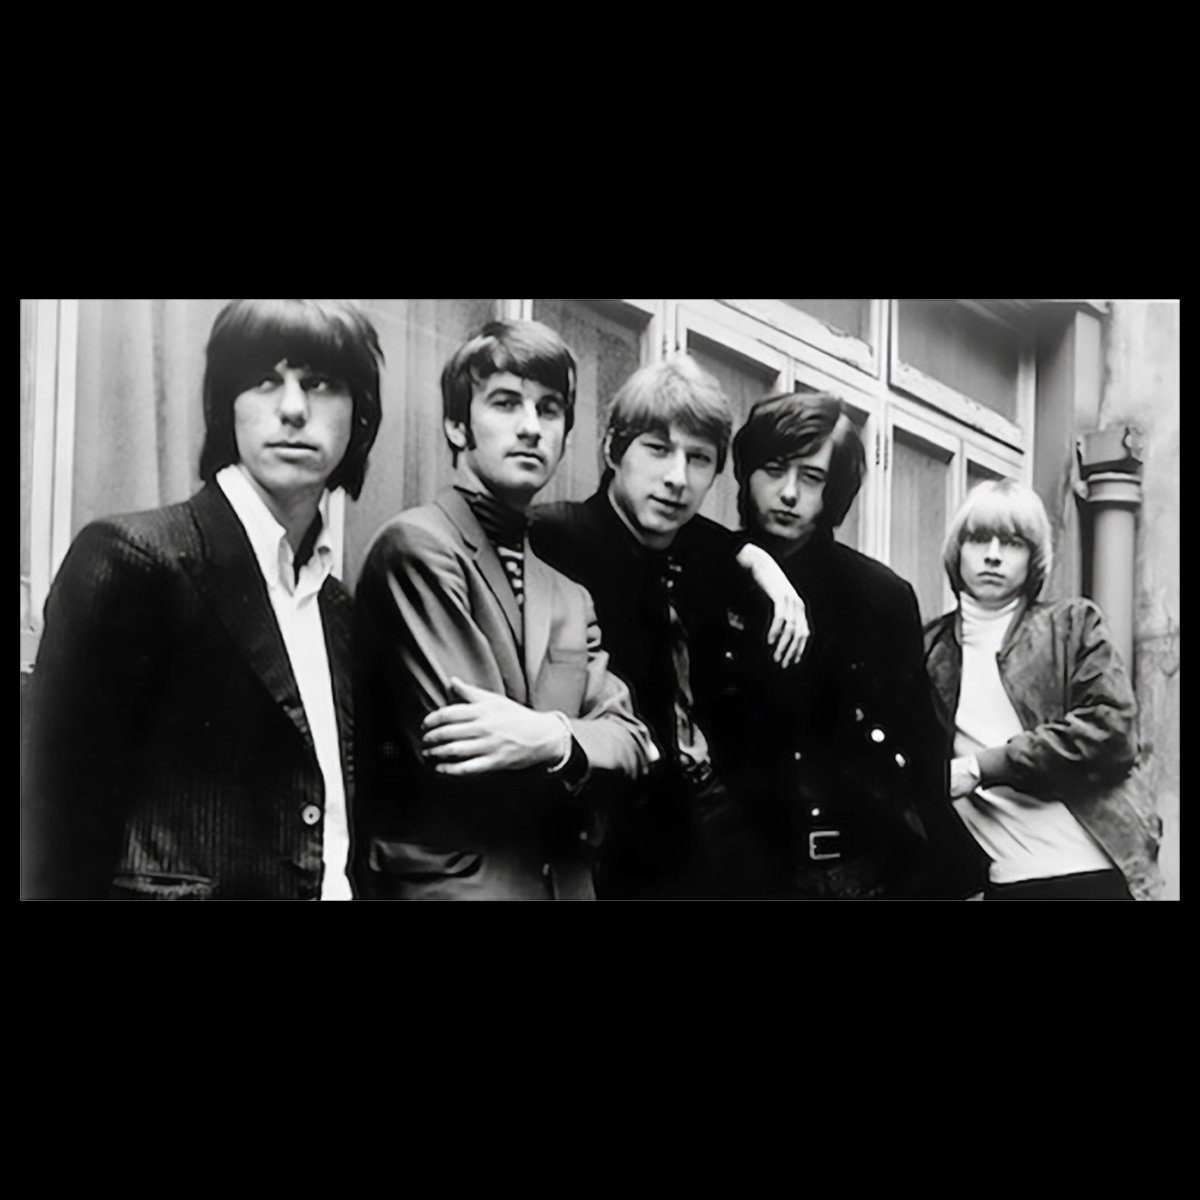 The Yardbirds with Jeff Beck (left) and Jimmy Page (second from right) 